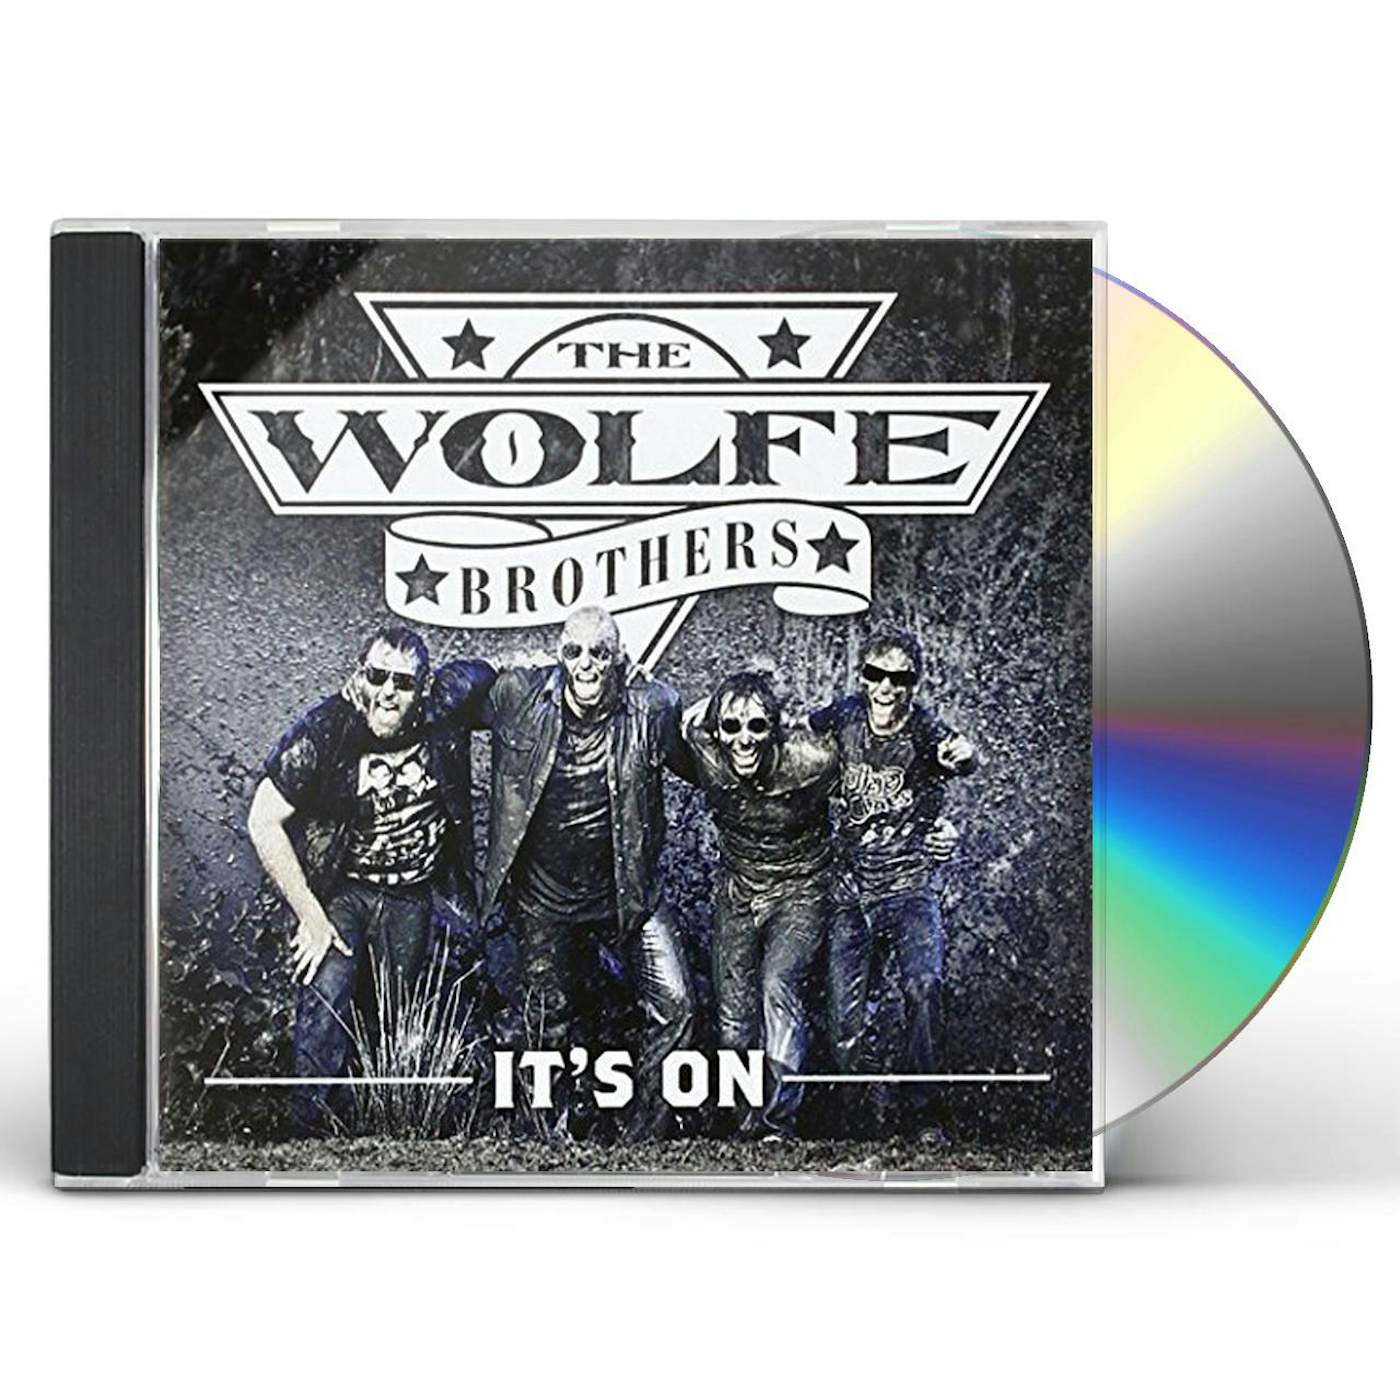 The Wolfe Brothers IT'S ON CD